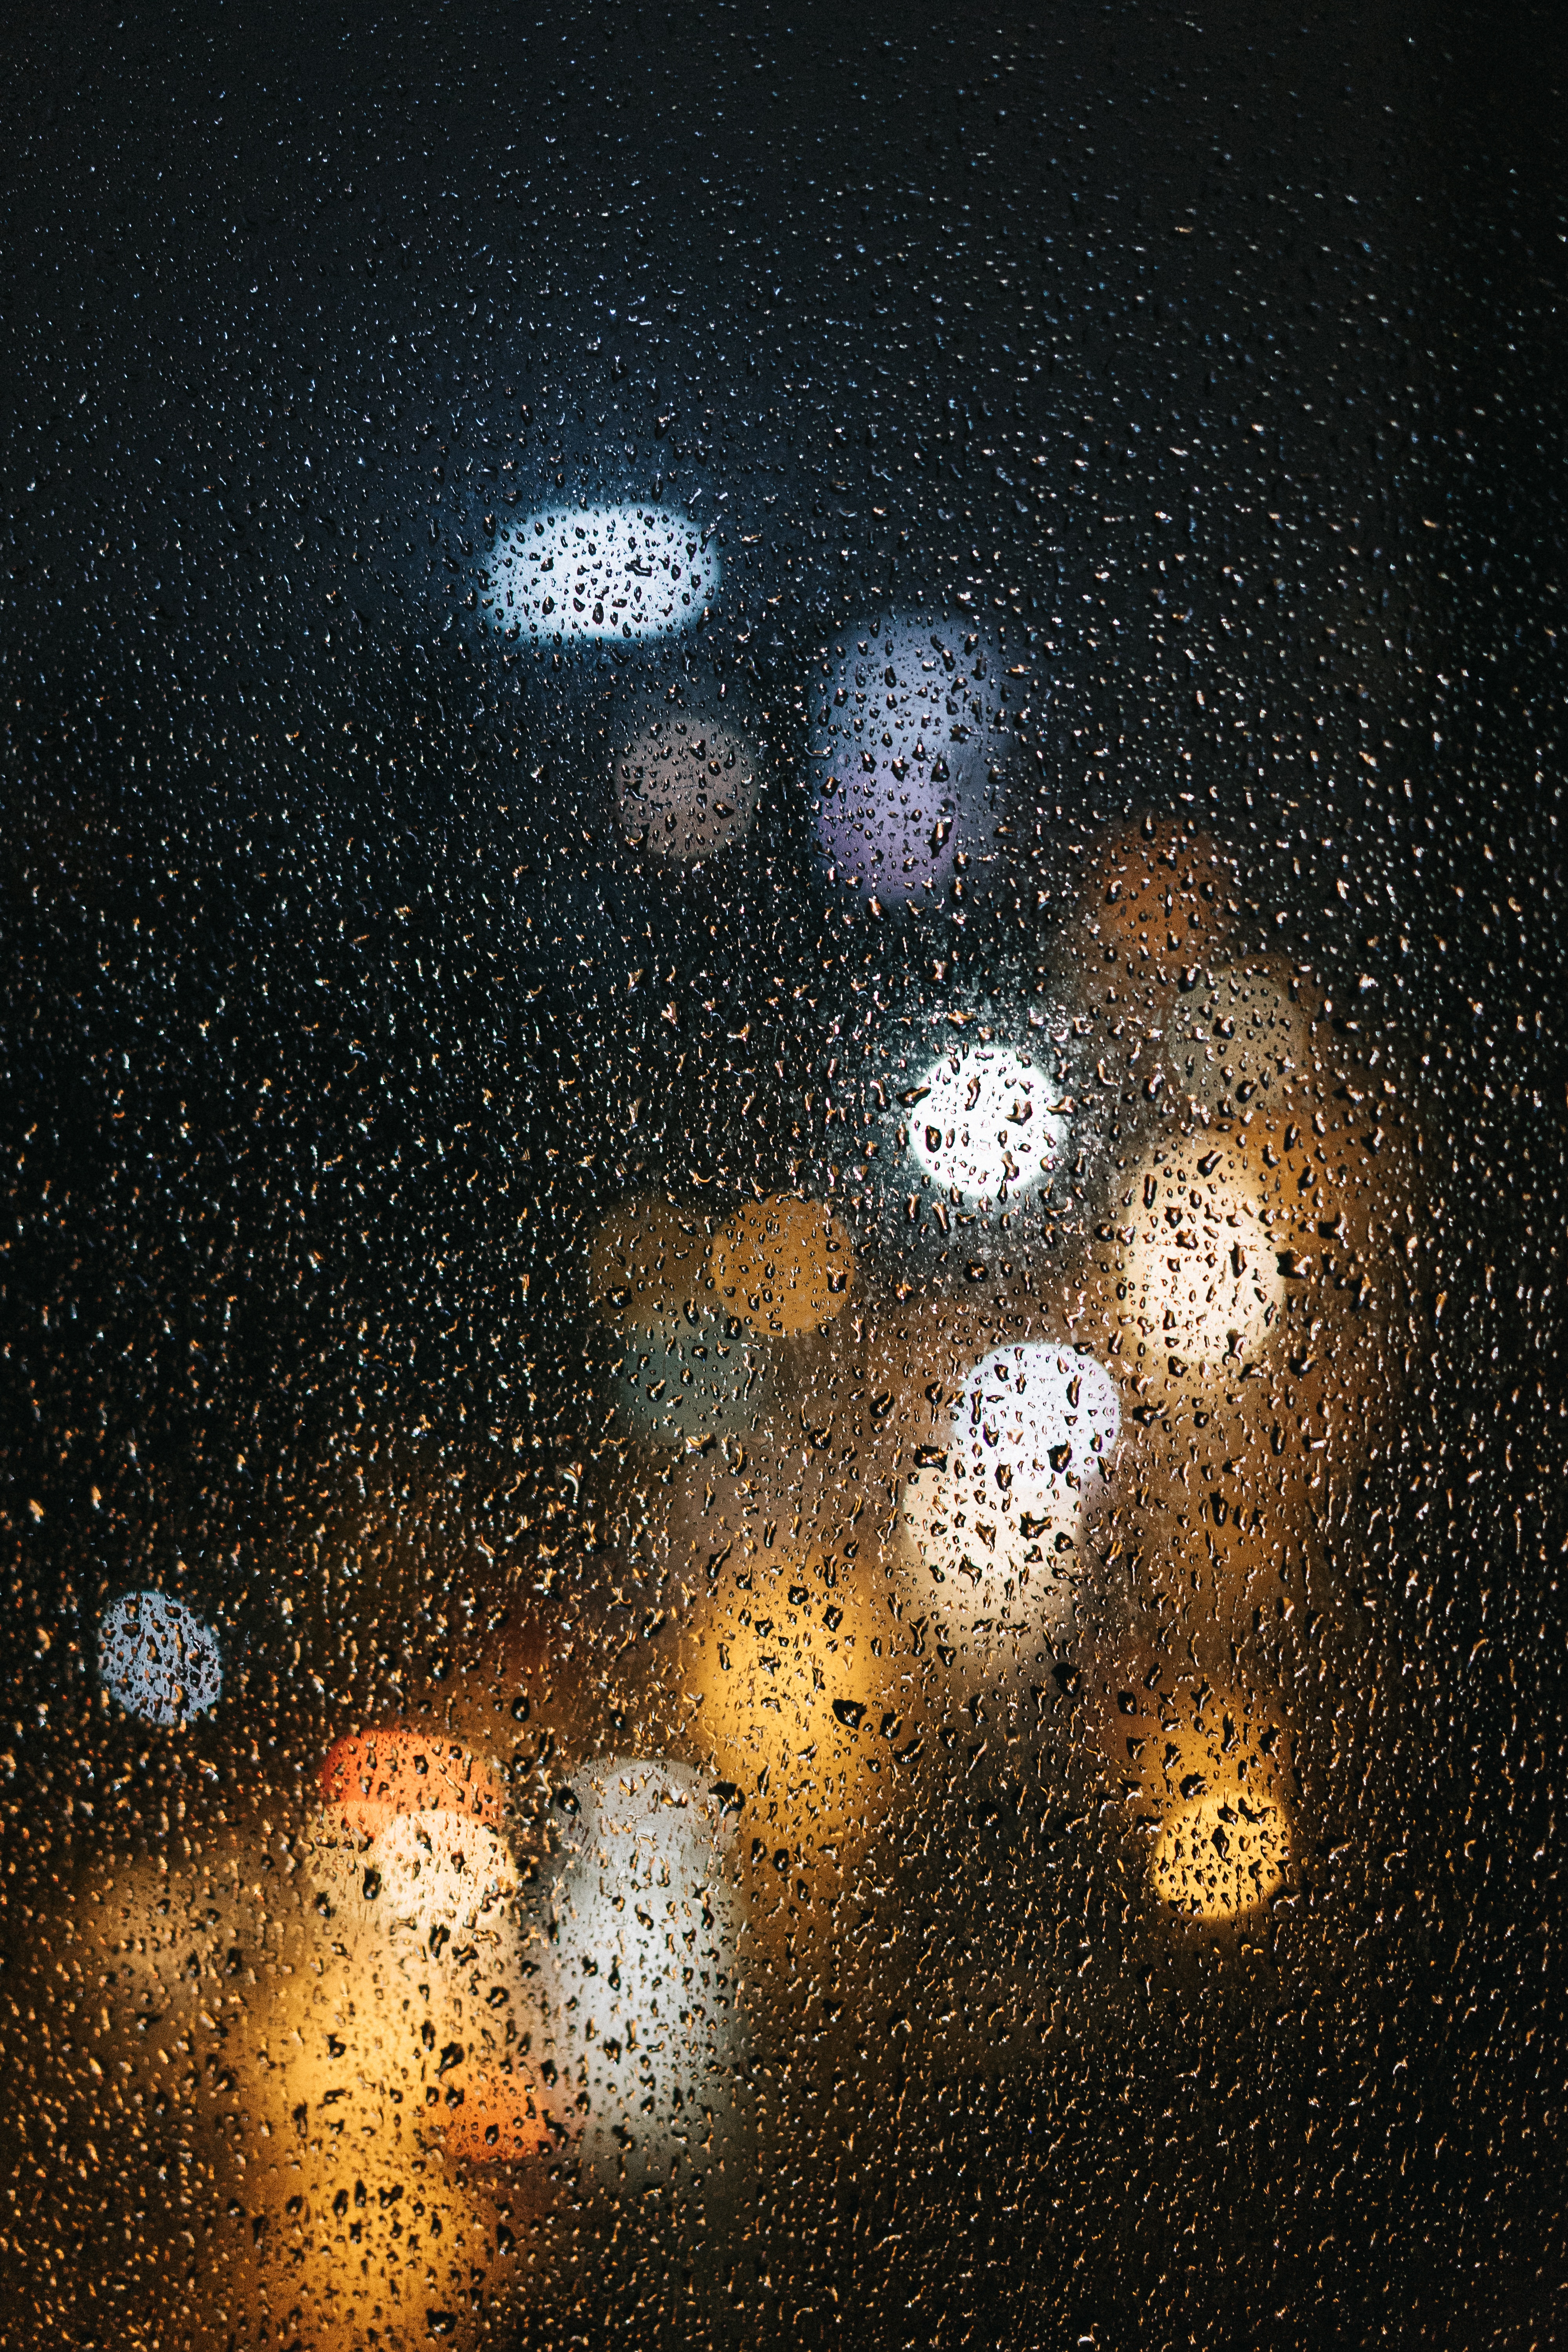 115636 download wallpaper glass, rain, drops, lights, macro, wet, surface, bokeh, boquet screensavers and pictures for free